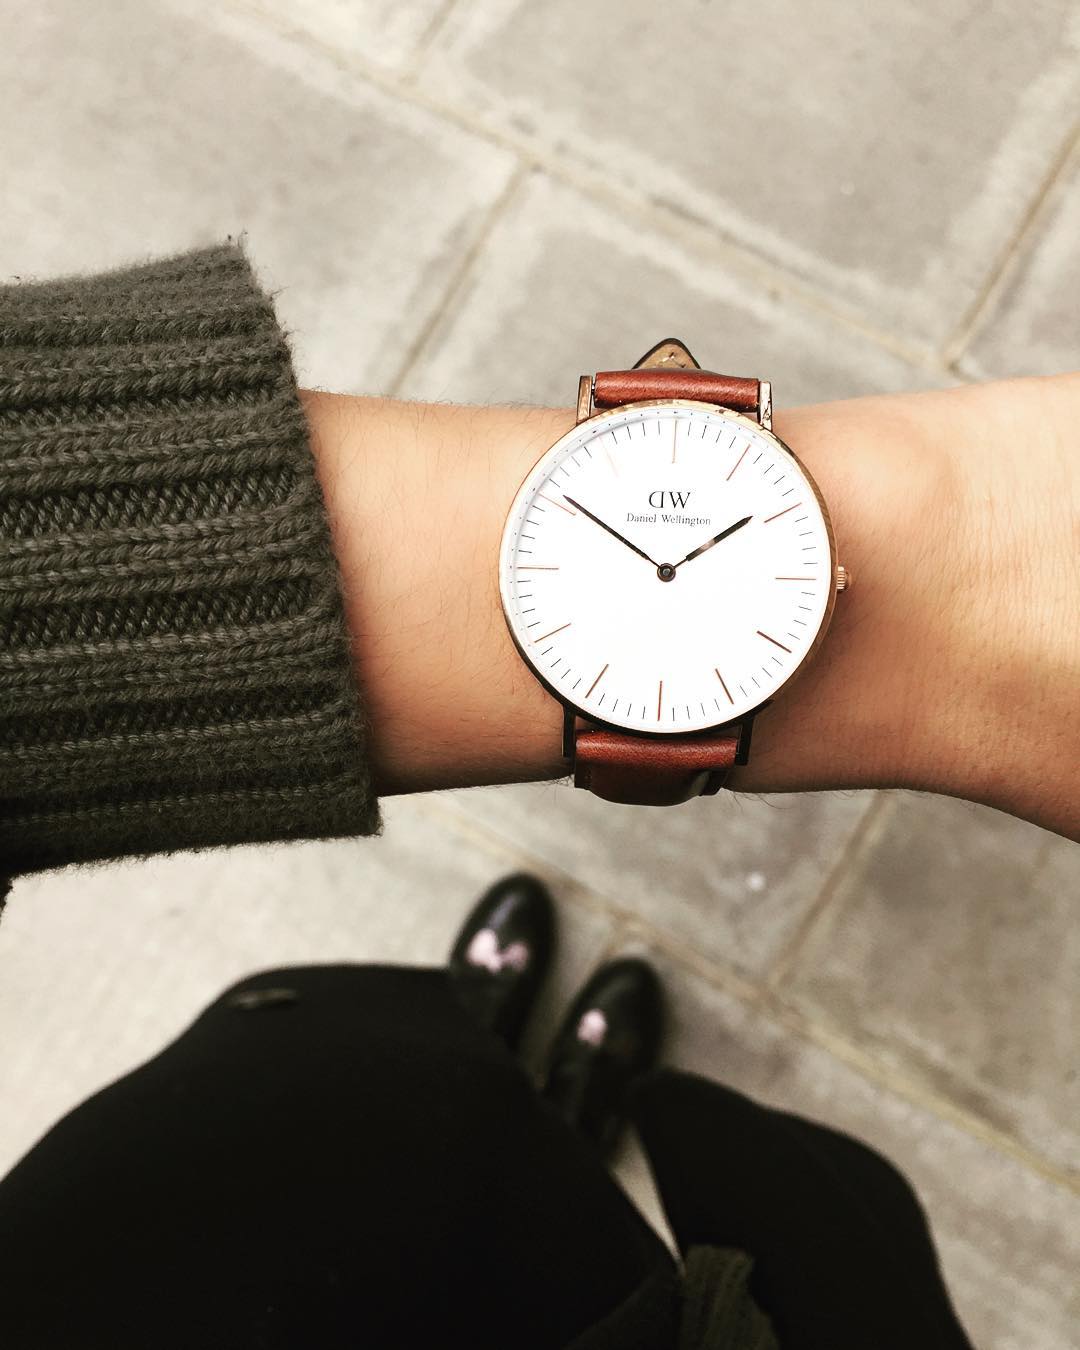 15% off one of my favourite watch brands @danielwellington www.danielwellington.com using the code KAVITACOLA #WithLoveFromLondon